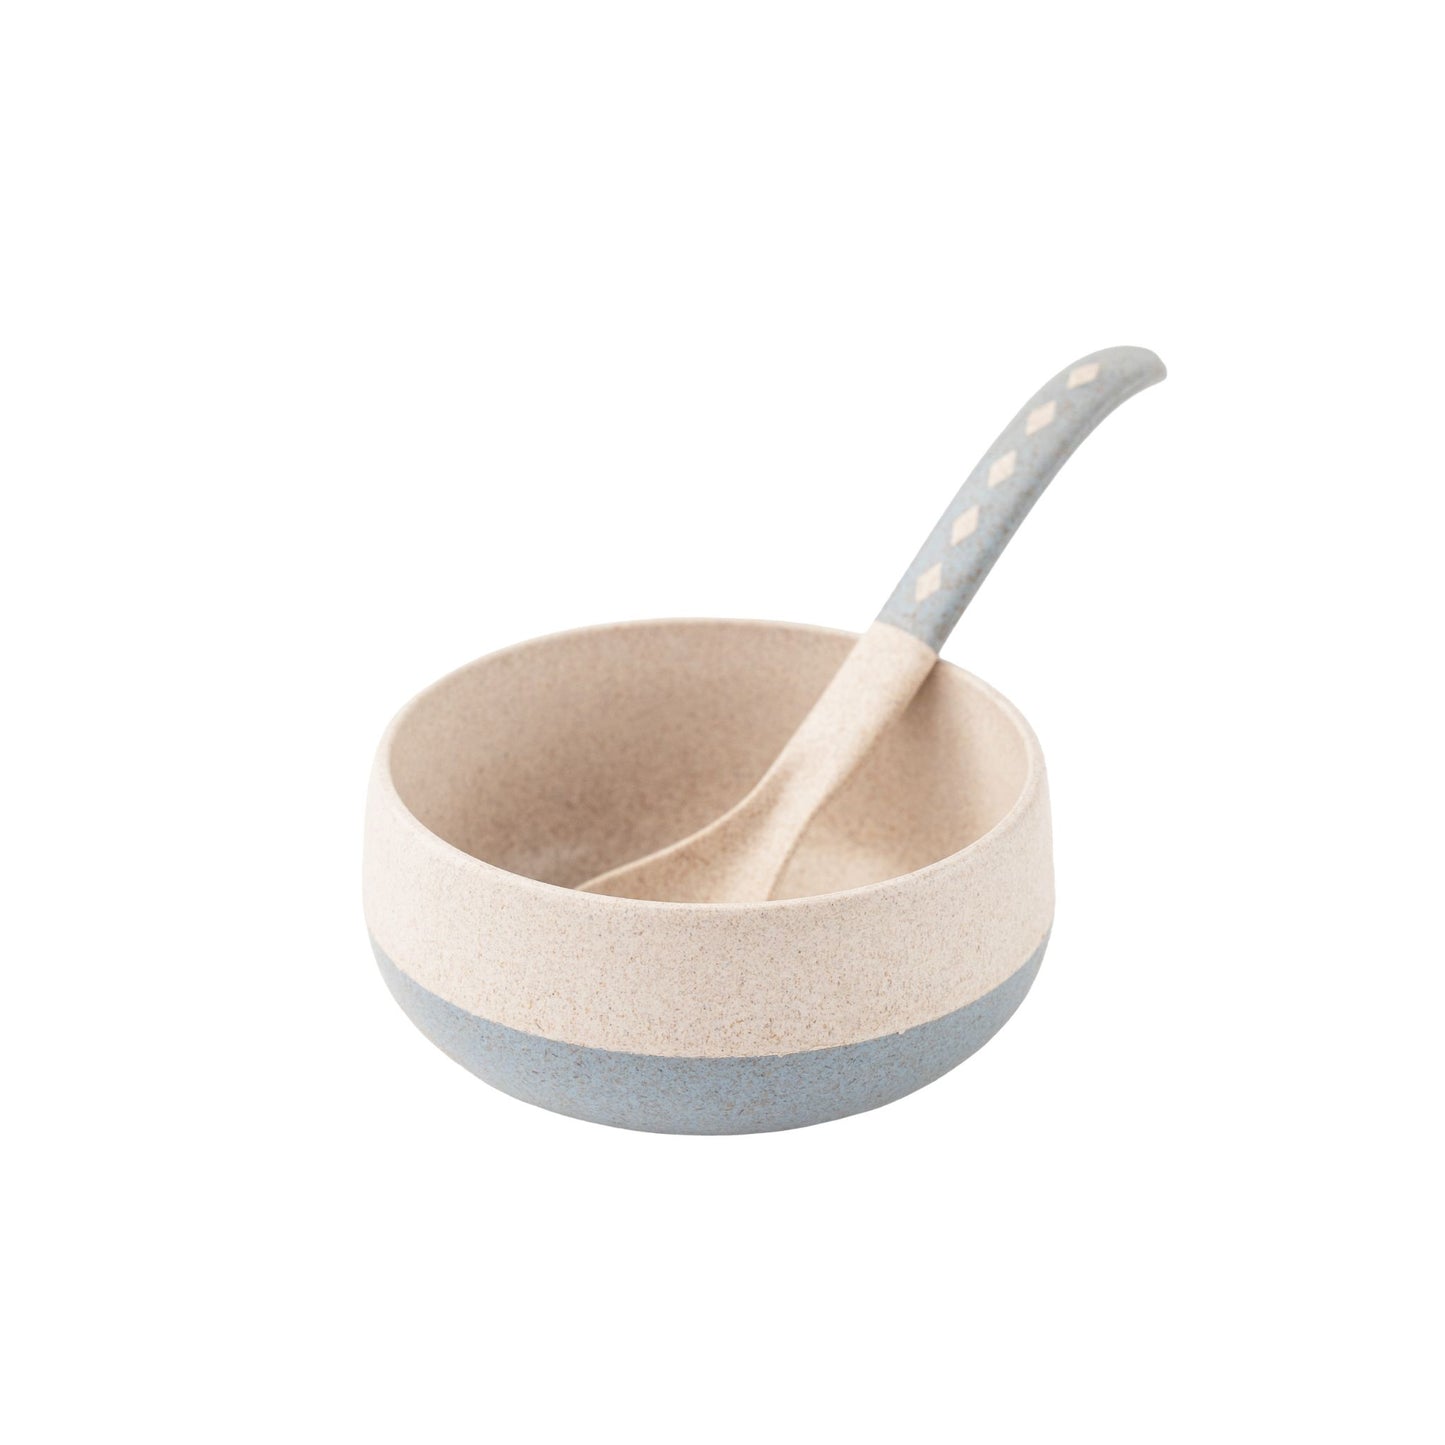 RICE HUSK ROUND BOWLS WITH SPOON - 250ML SET OF 4